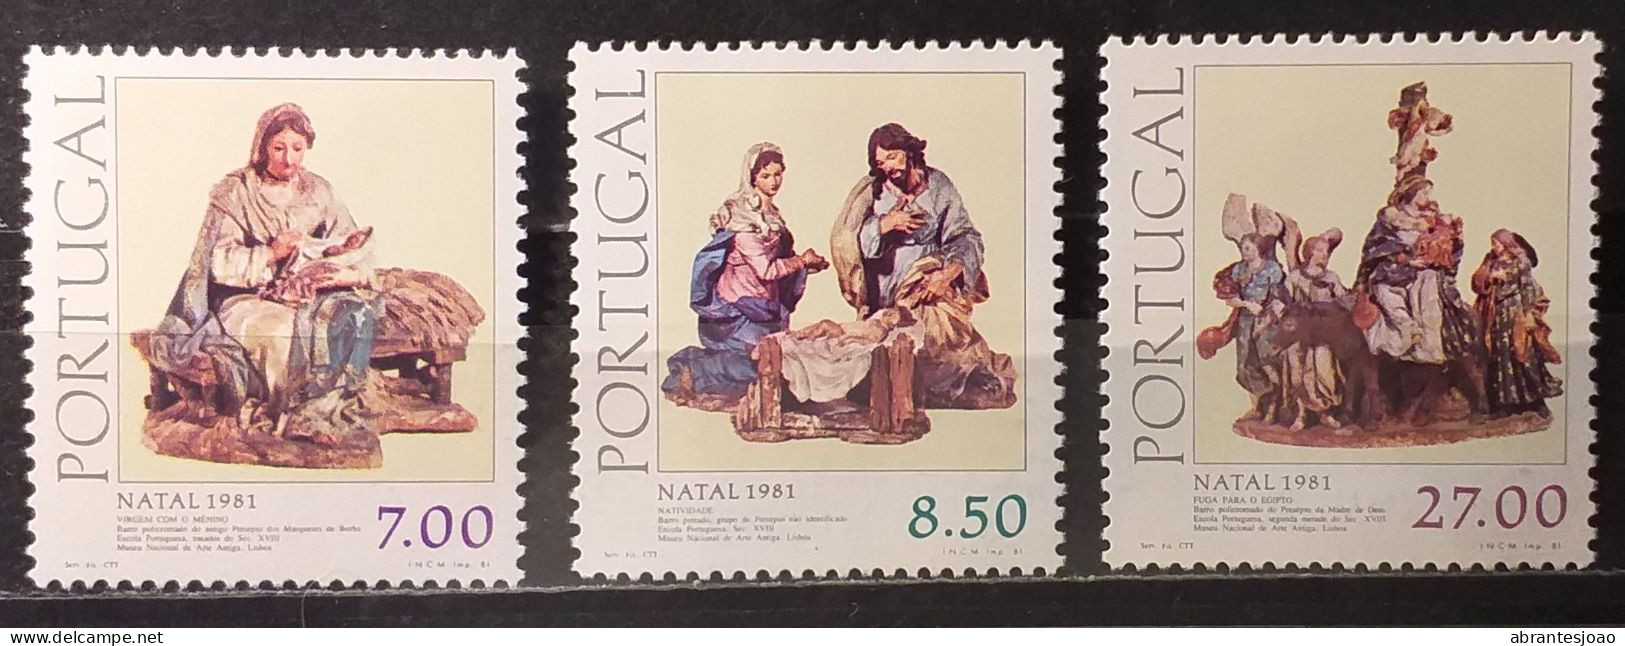 1981 - Portugal - MNH - 5th. Centenary Of Access Of King John II To The Throne + Christmas - 5 Stamps - Nuevos